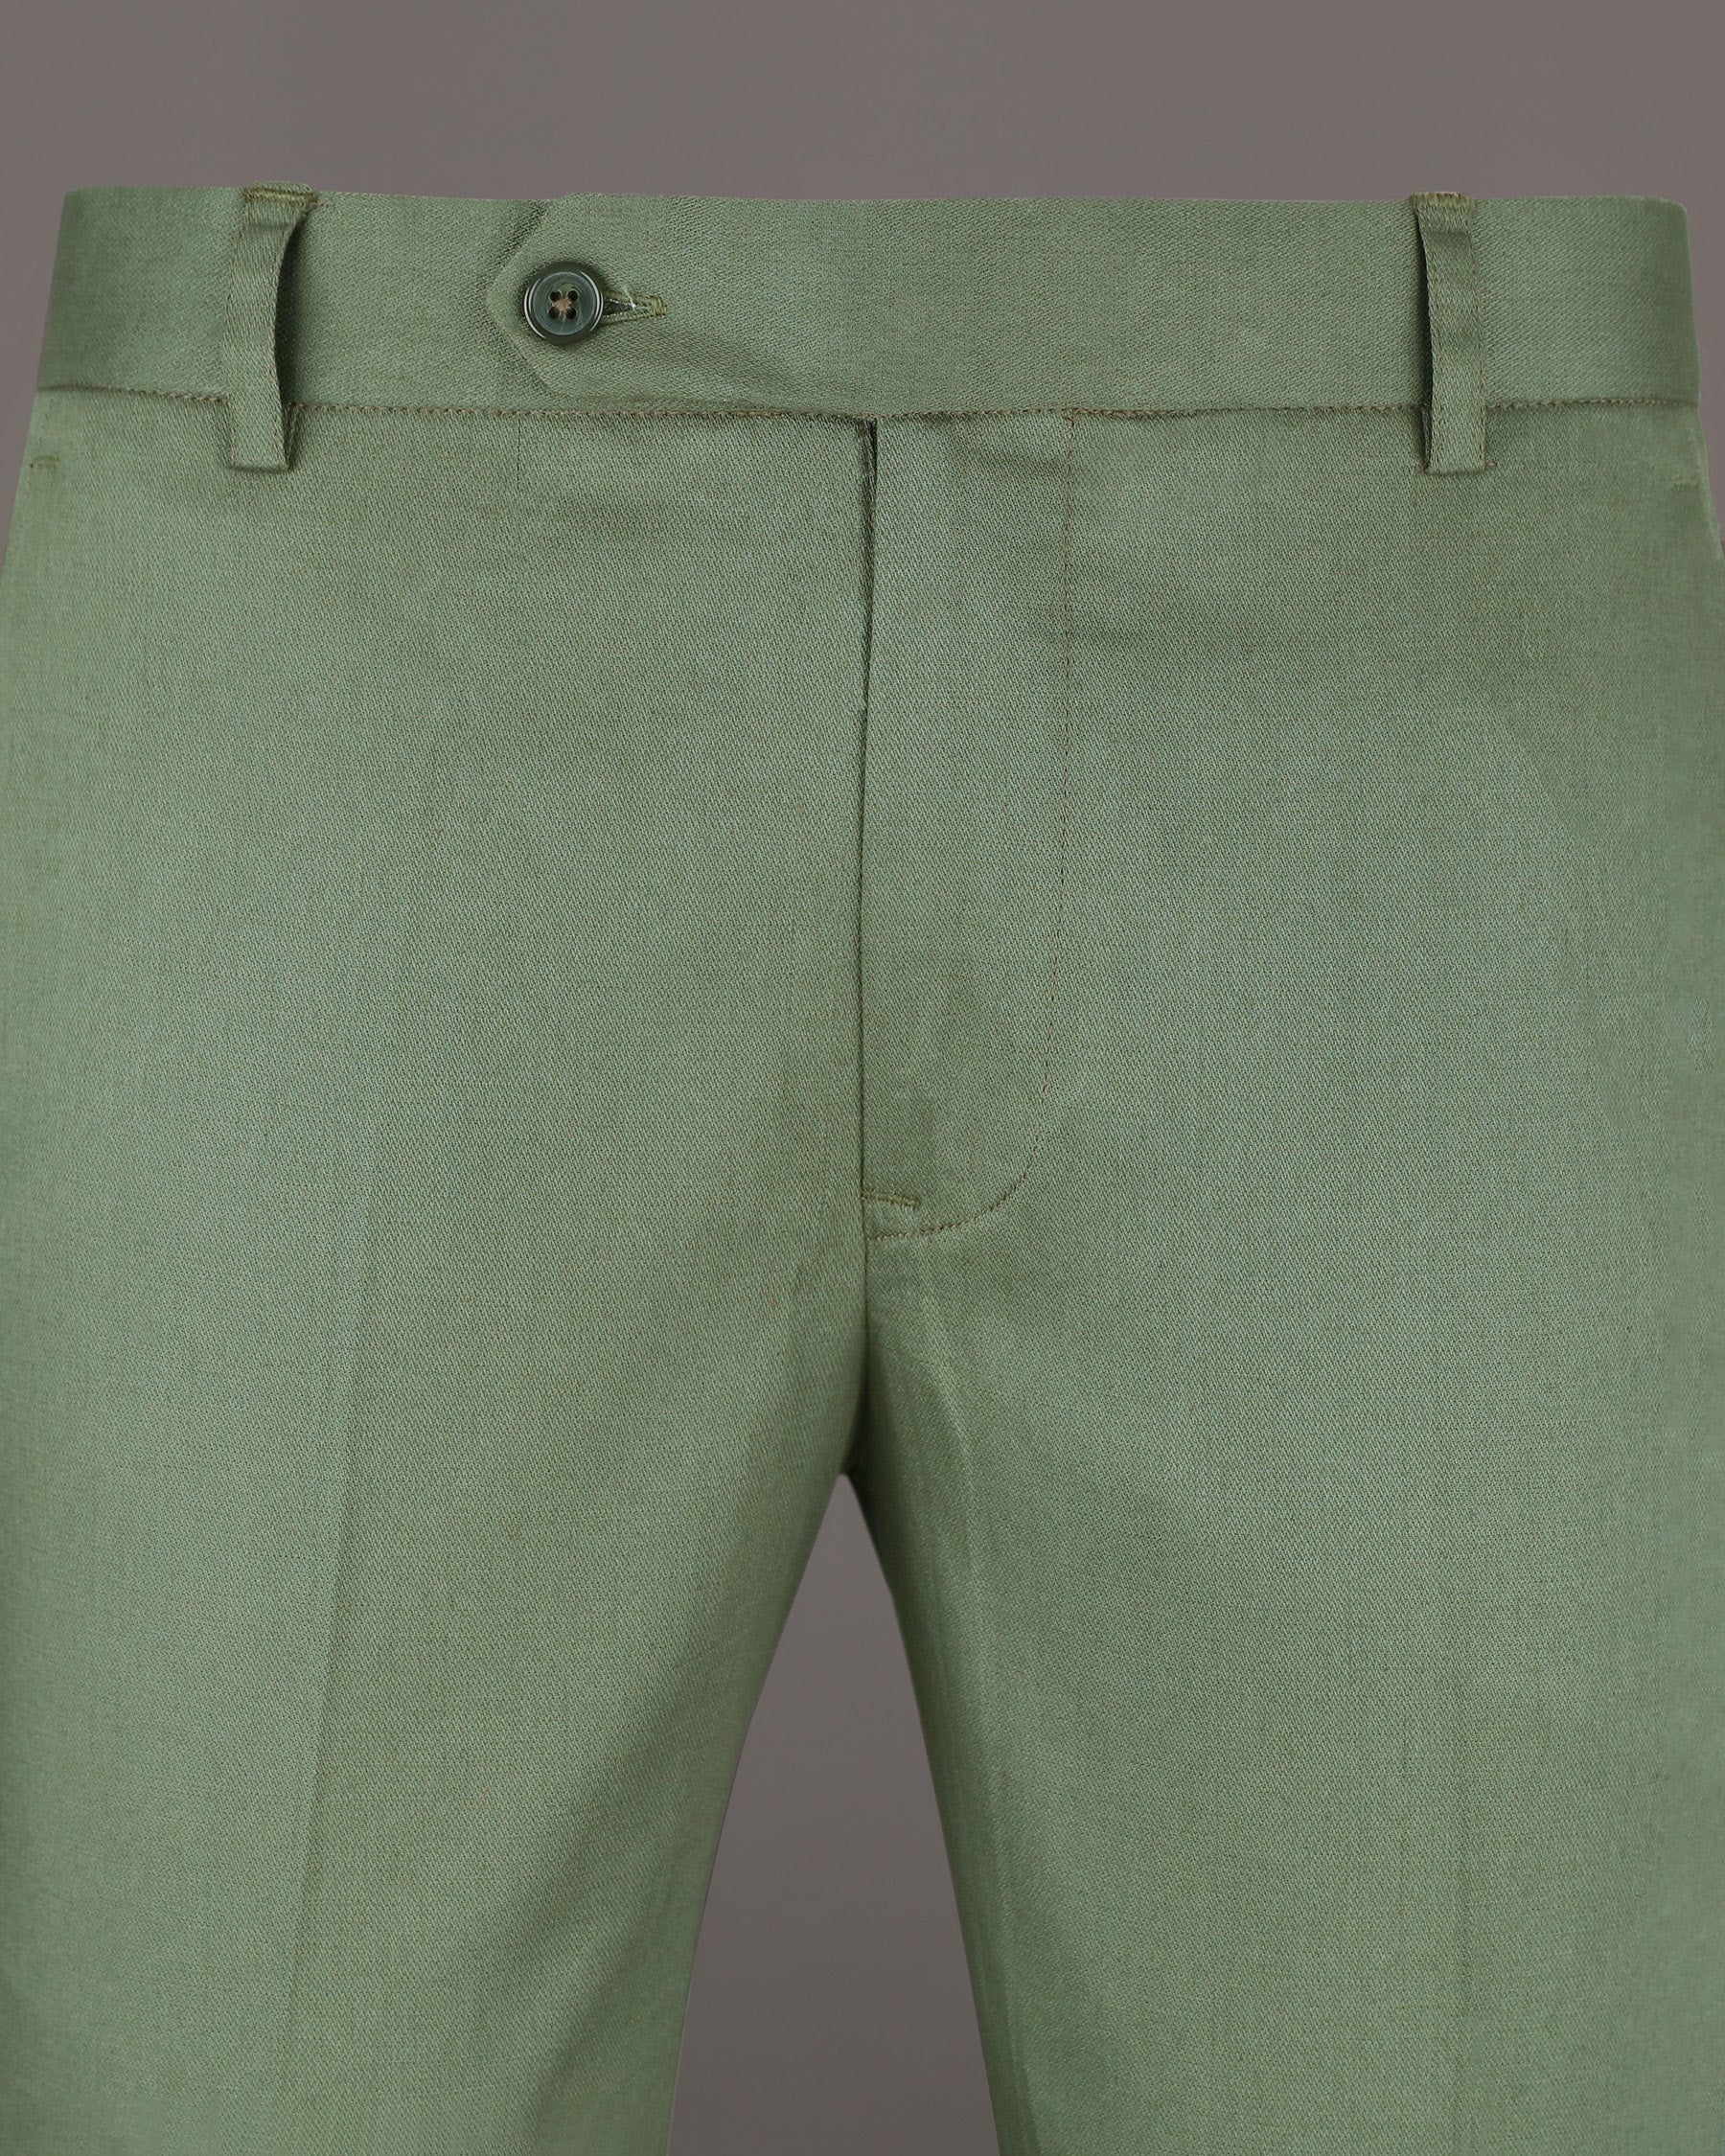 Willow Grove Green Luxurious Linen Pant T1197-28, T1197-30, T1197-32, T1197-34, T1197-36, T1197-40, T1197-42, T1197-44, T1197-38